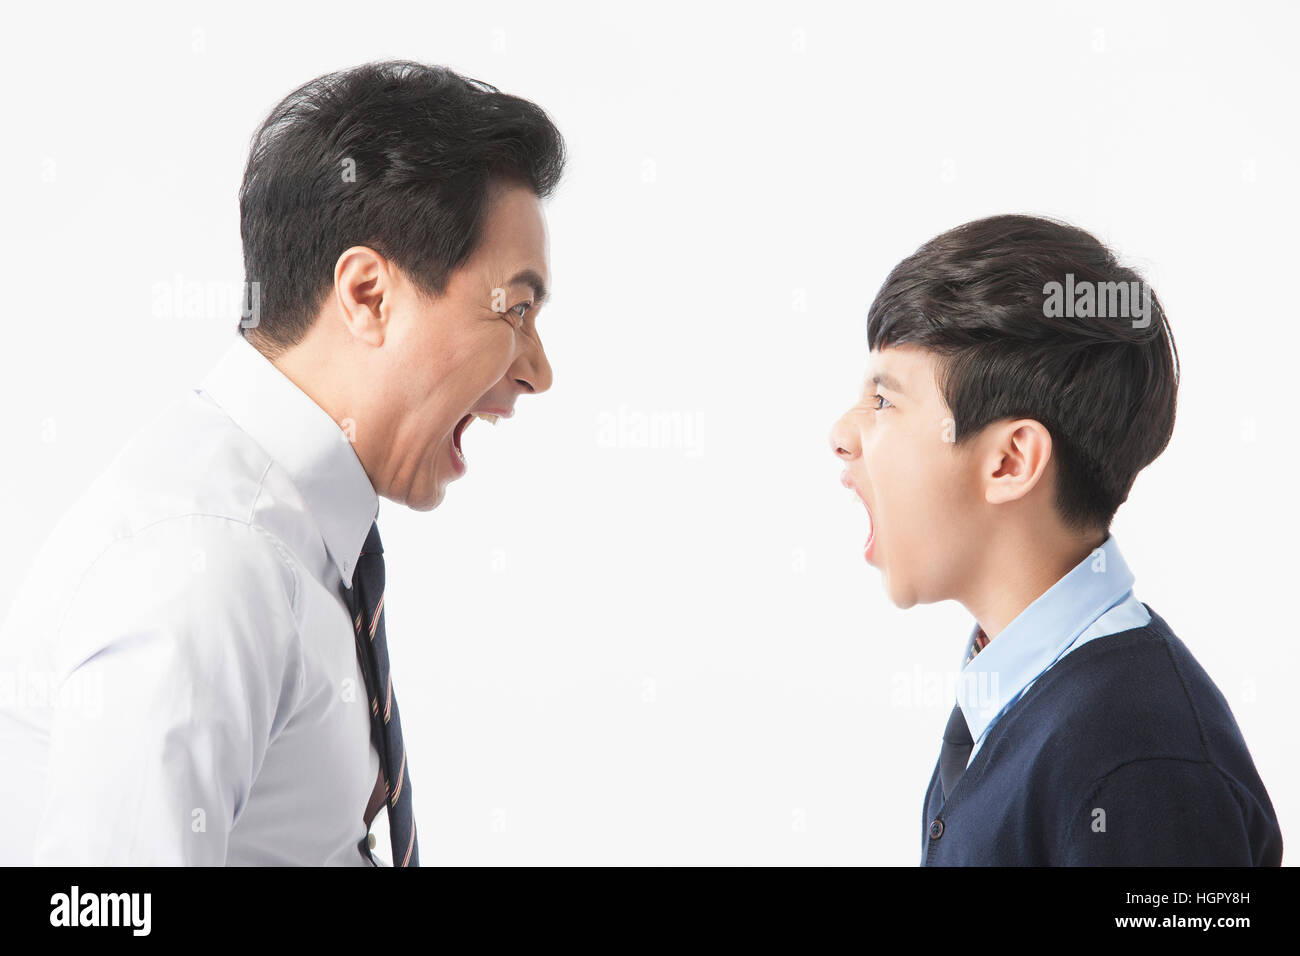 Side view portrait of teacher and school boy yelling at each other Stock Photo